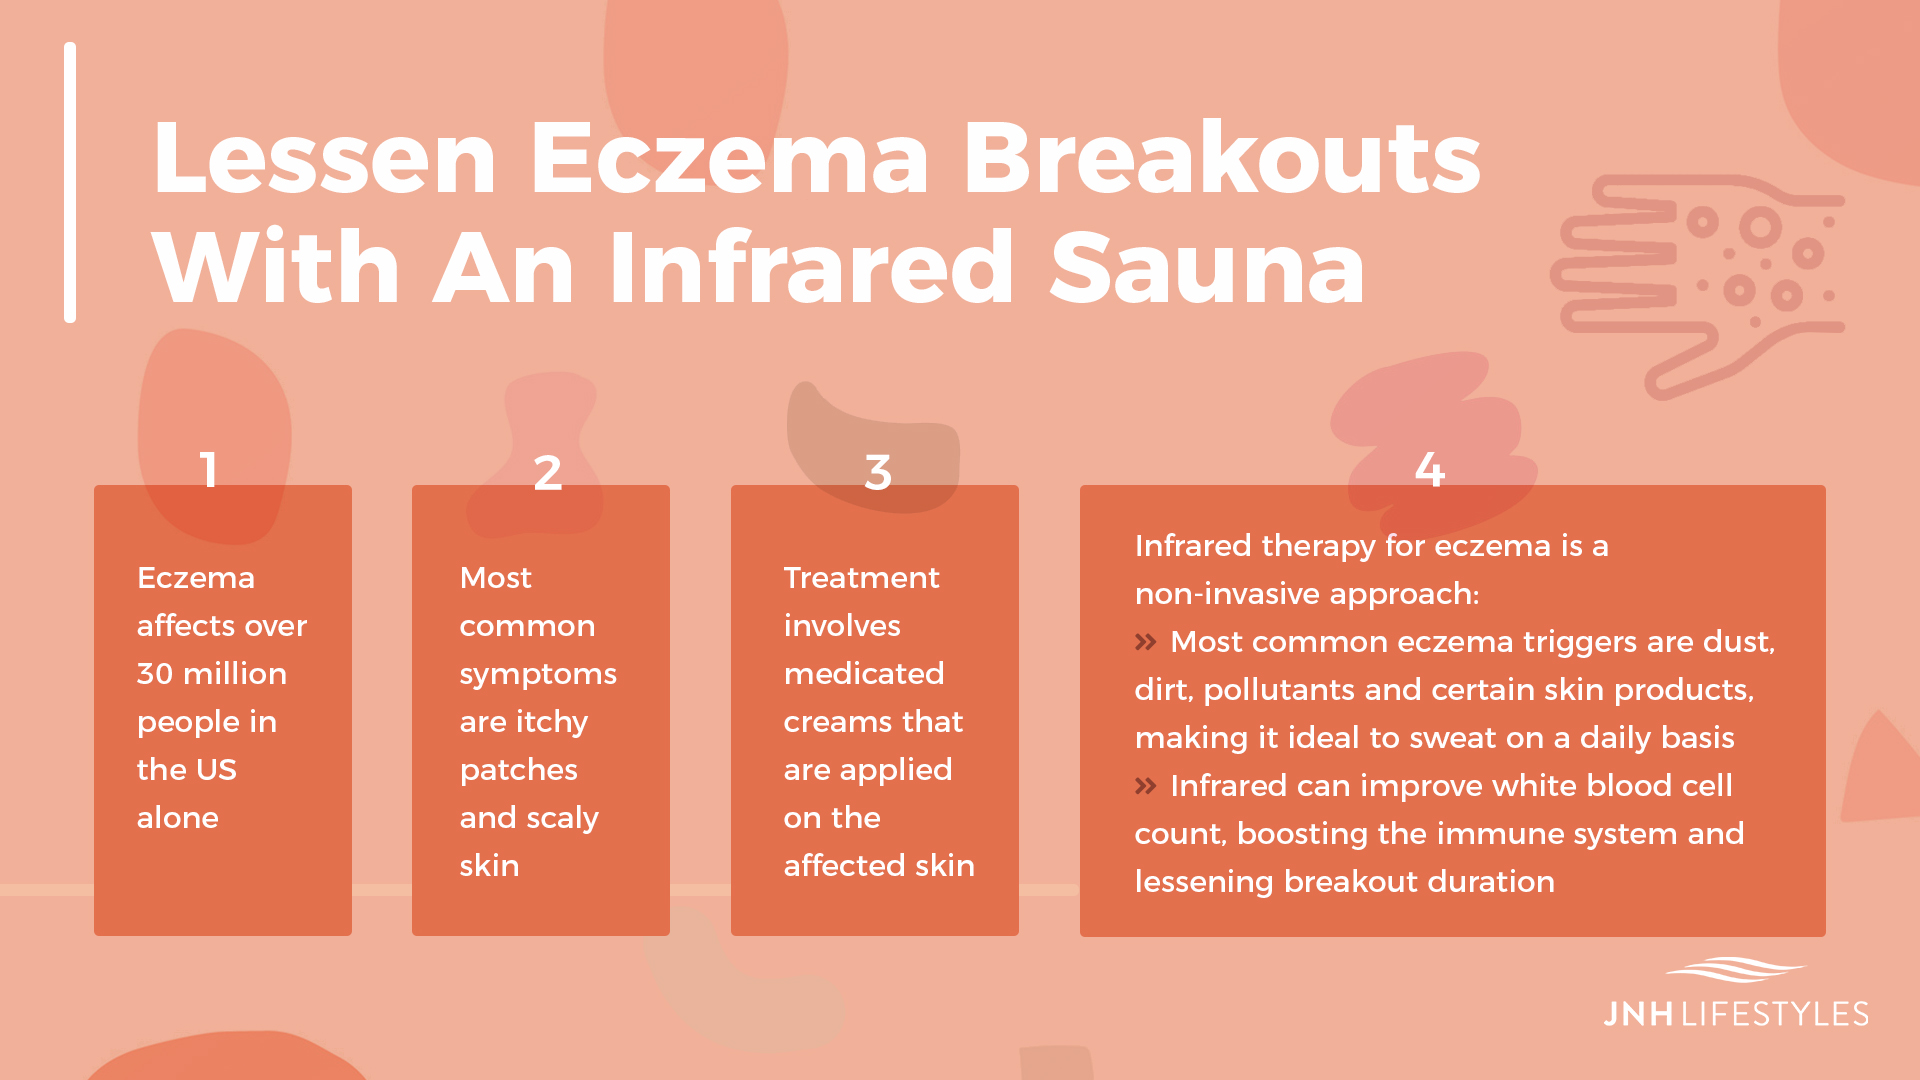 Lessen Eczema Breakouts With An Infrared Sauna 1. Eczema affects over 30 million people in the US alone 2. Most common symptoms are itchy patches and scaly skin 3. Treatment involves medicated creams that are applied on the affected skin 4. Infrared therapy for eczema is a non-invasive approach: -Most common eczema triggers are dust, dirt, pollutants and certain skin products, making it ideal to sweat on a daily basis -Infrared can improve white blood cell count, boosting the immune system and lessening breakout duration